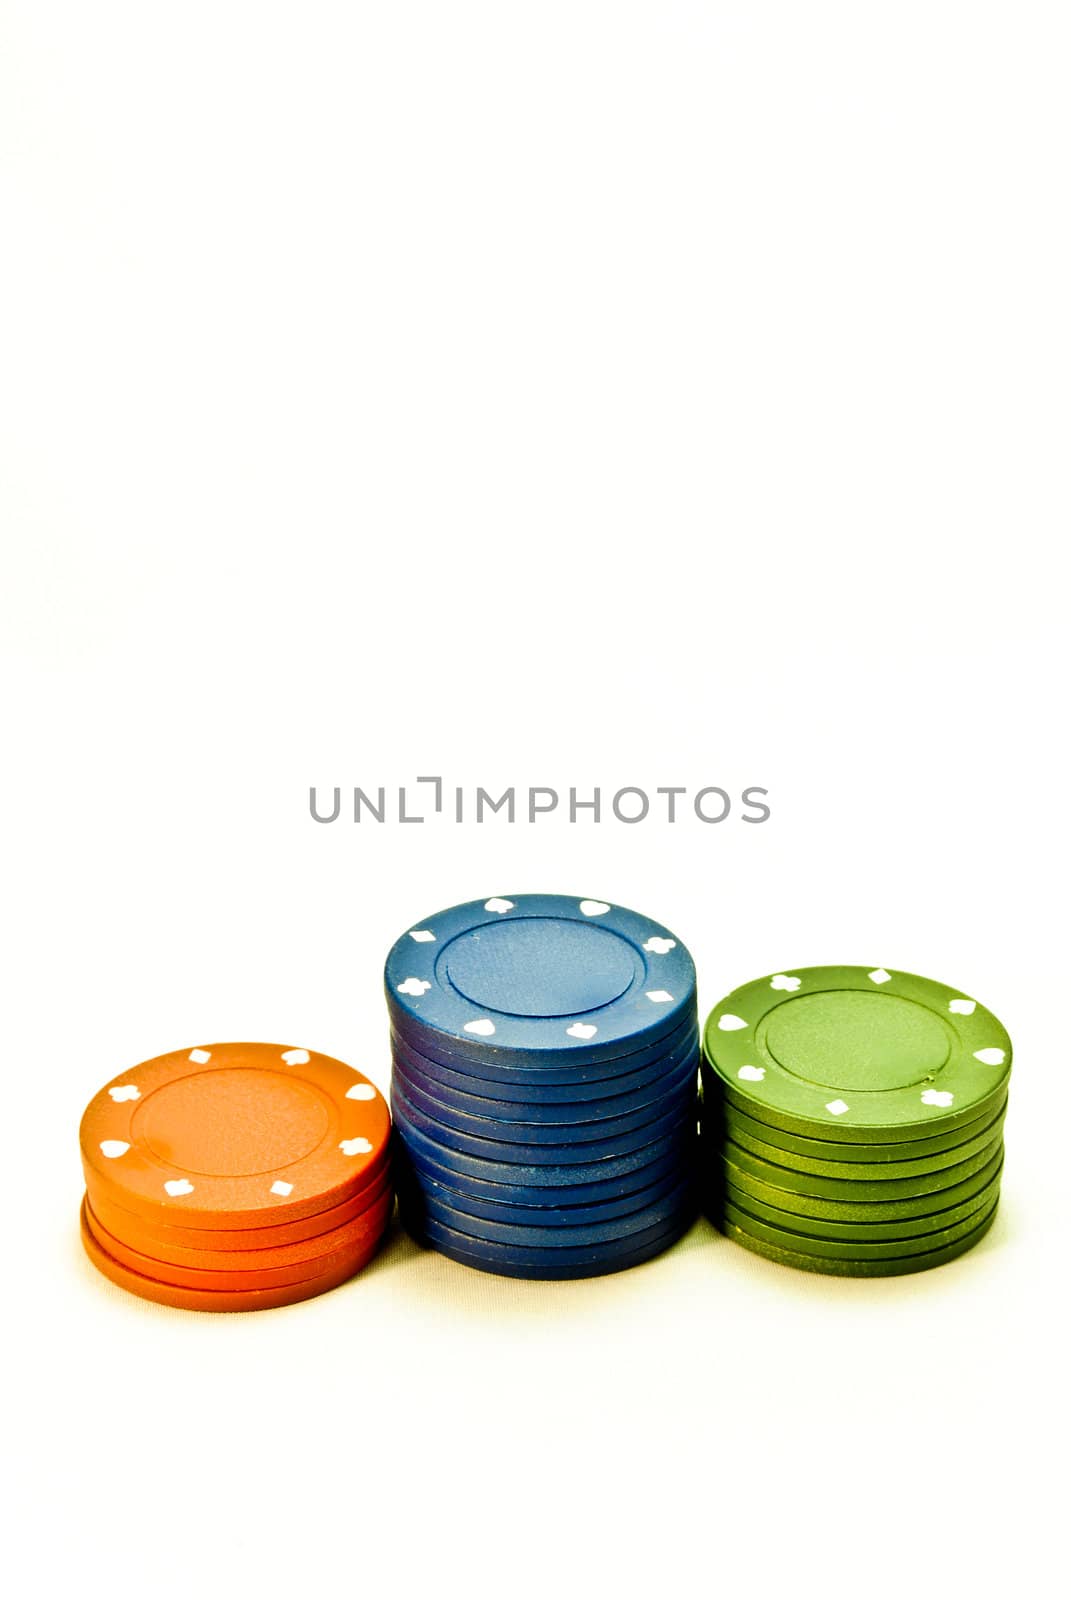 Three stacks of red, blue and green poker chips